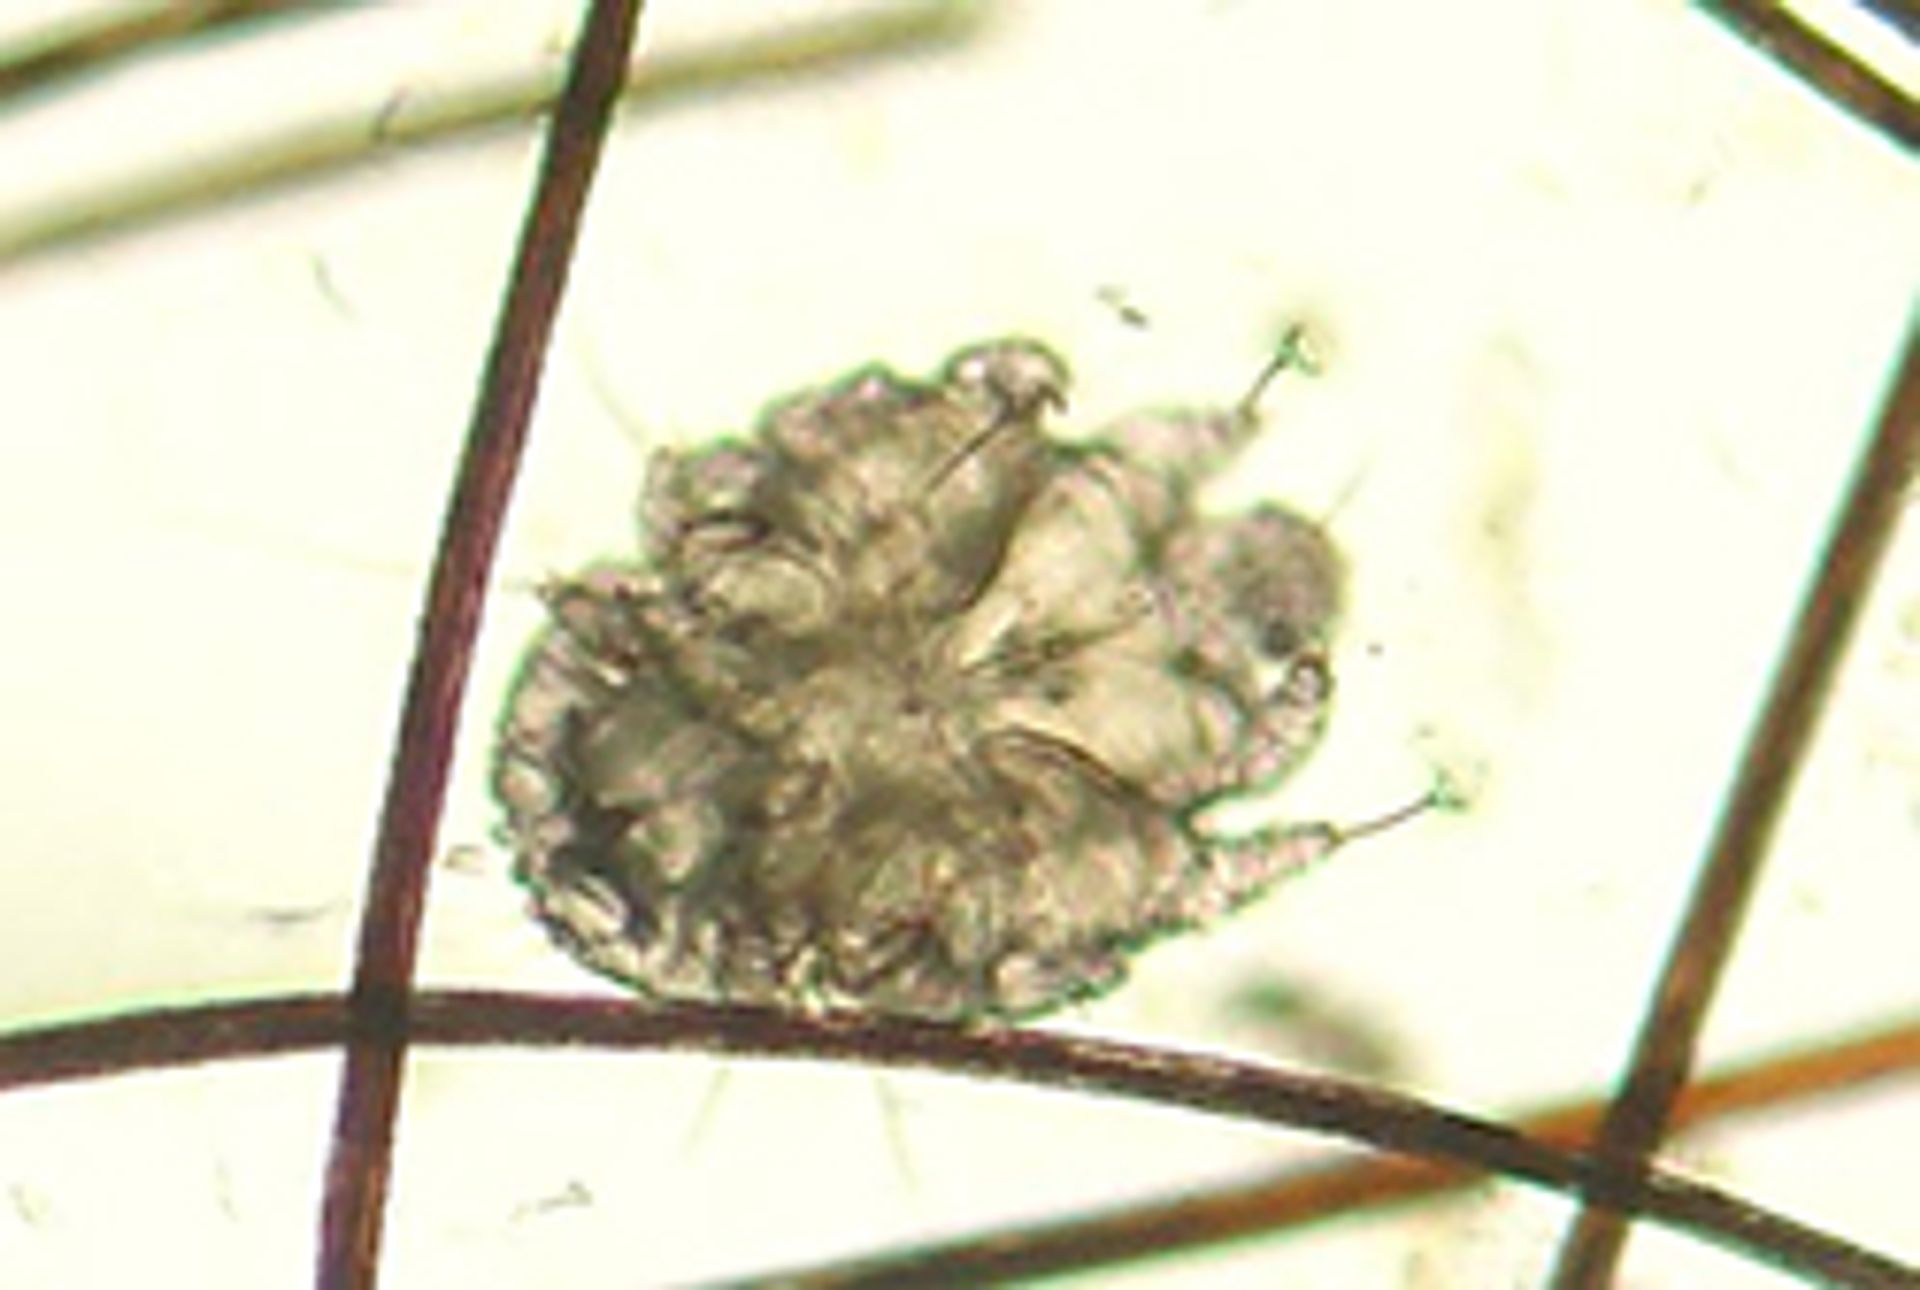 Canine_scabies_mite2